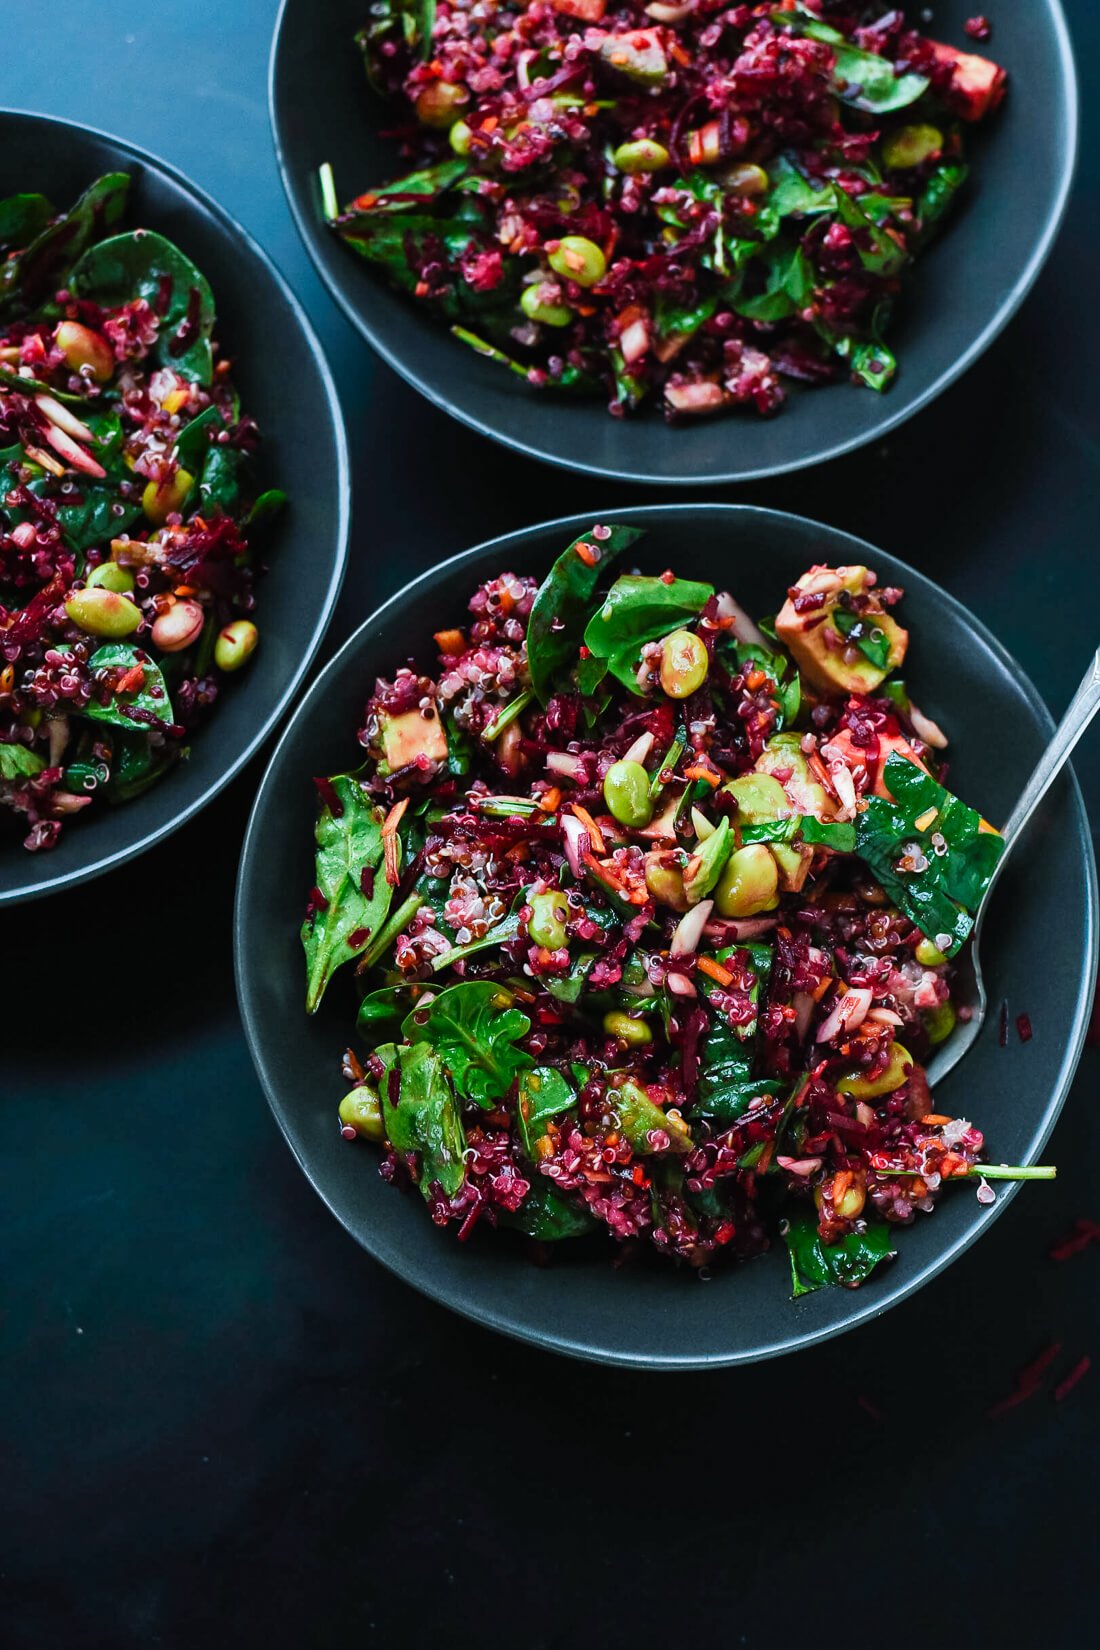 Salad of raw beets with carrots, quinoa and spinach in bowls